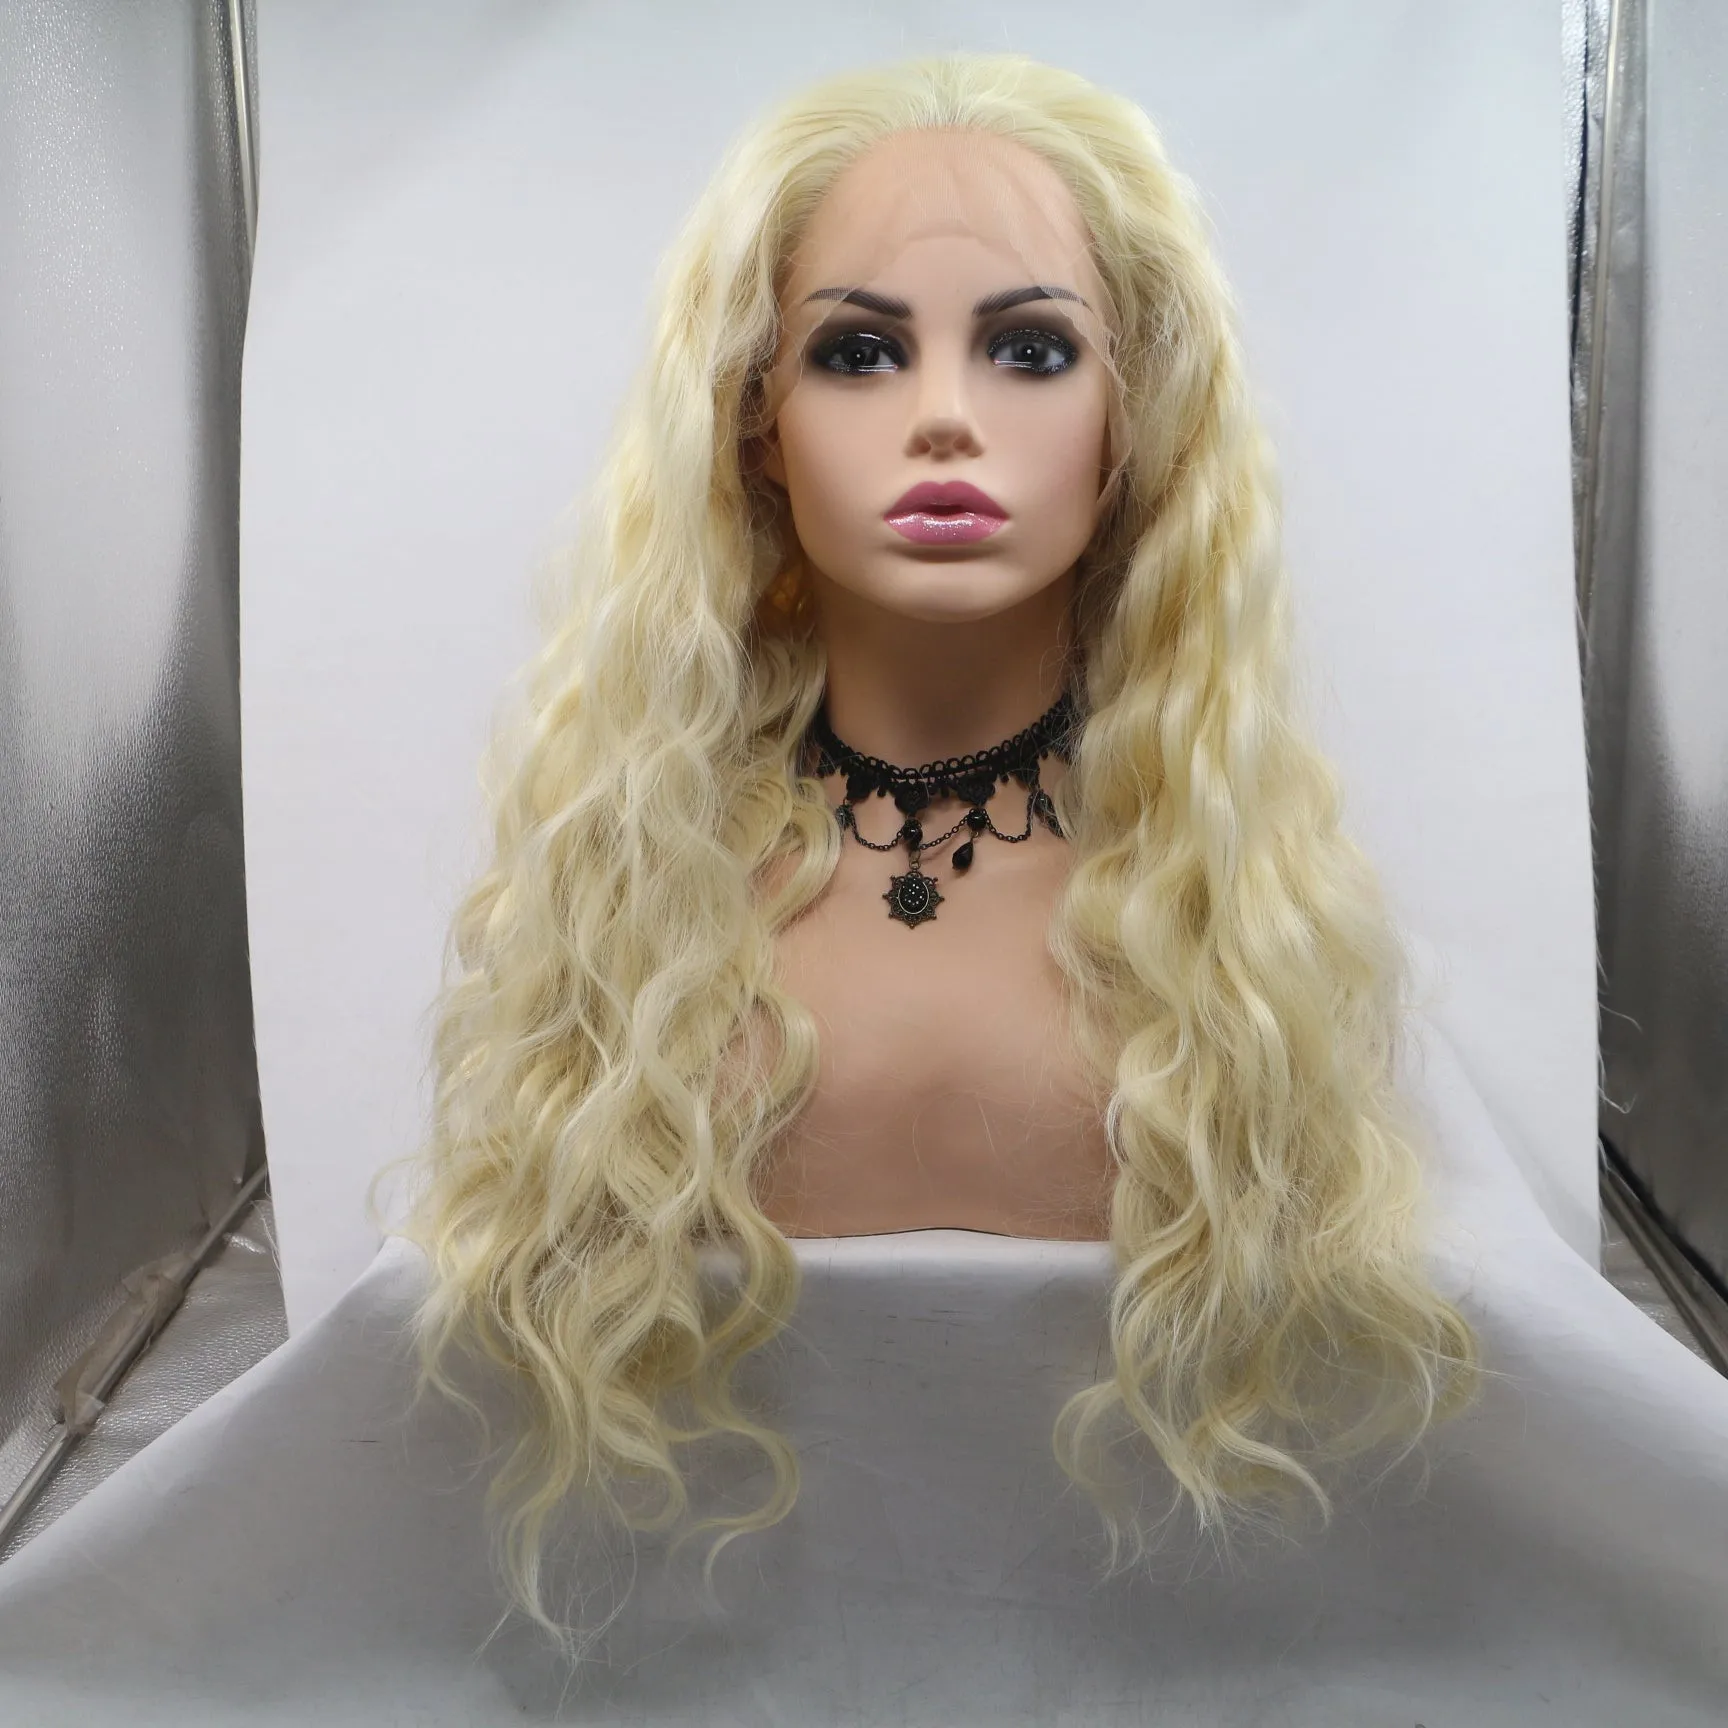 Women Wigs Light Yellow Body Wave Long Lace Front High Heat Resistant Fiber Synthetic Hair Wig